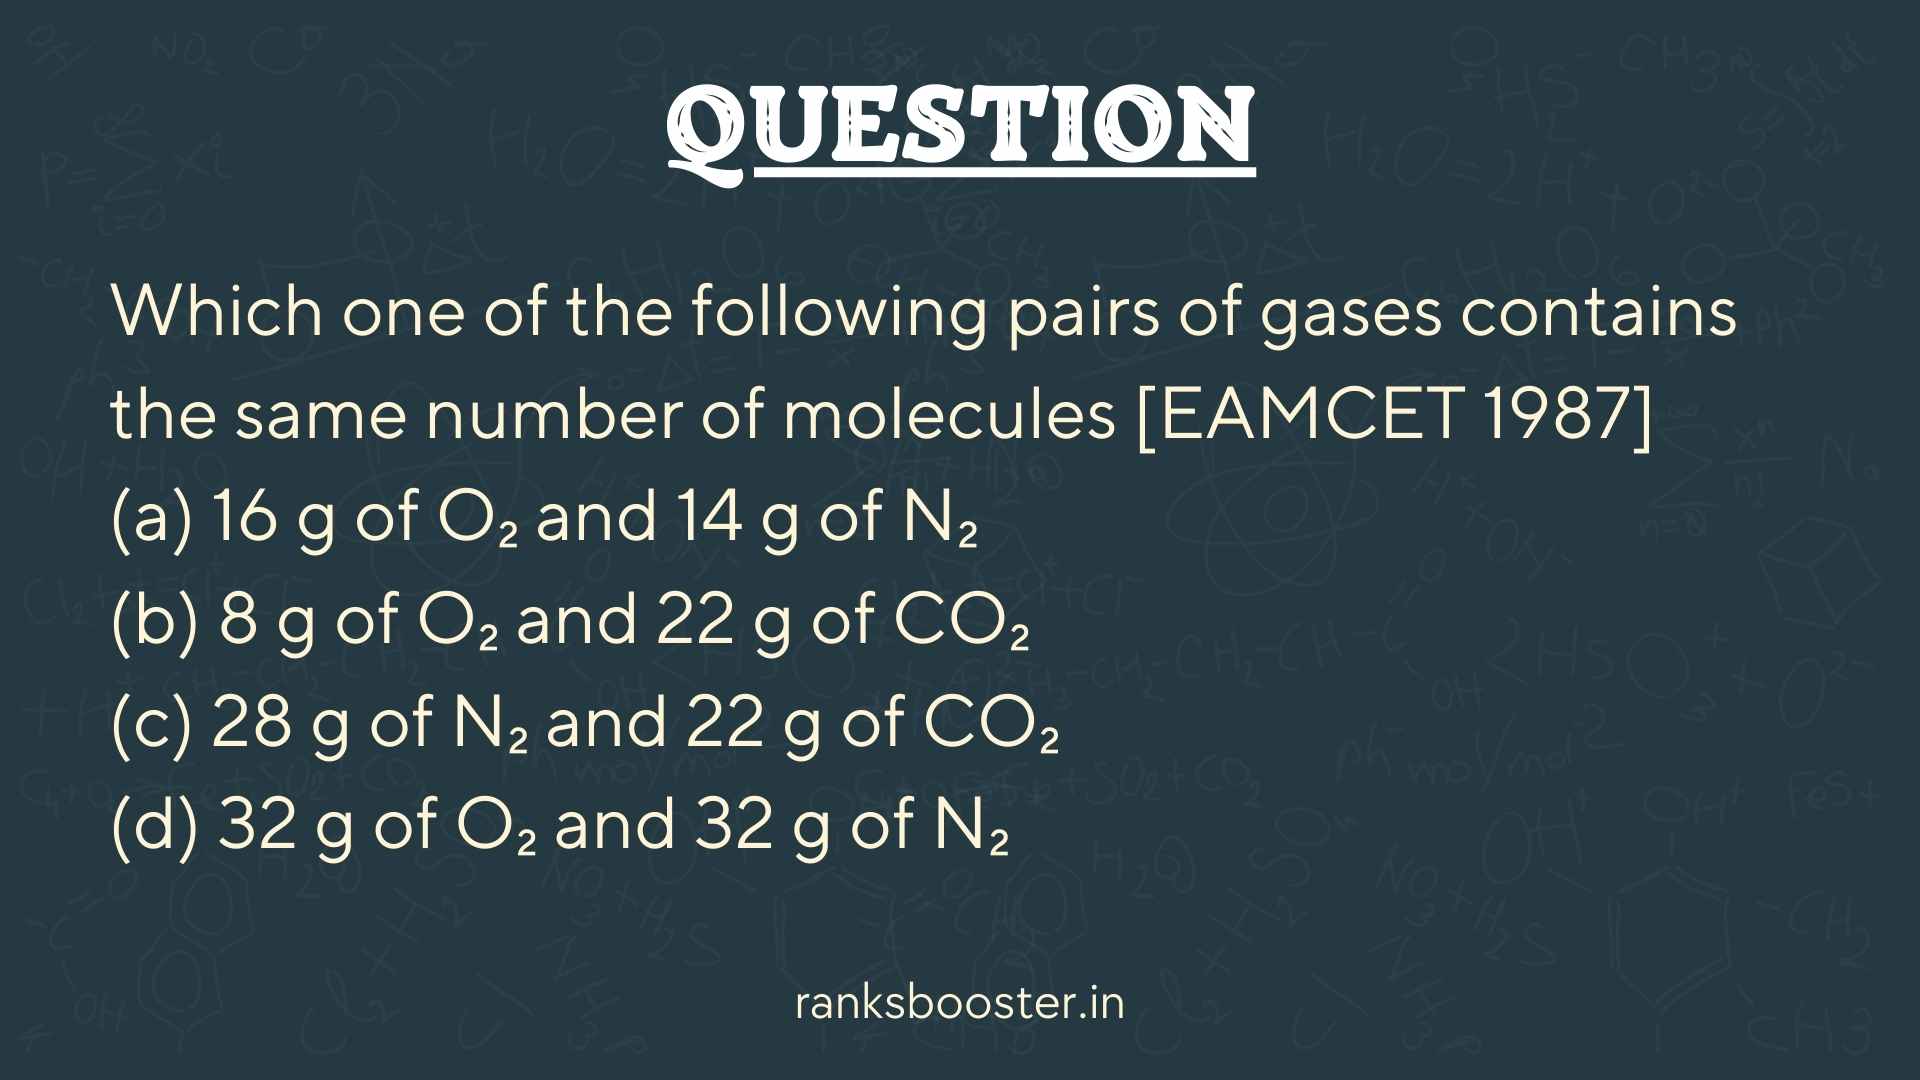 Which one of the following pairs of gases contains the same number of molecules [EAMCET 1987] (a) 16 g of O₂ and 14 g of N₂ (b) 8 g of O₂ and 22 g of CO₂ (c) 28 g of N₂ and 22 g of CO₂ (d) 32 g of O₂ and 32 g of N₂